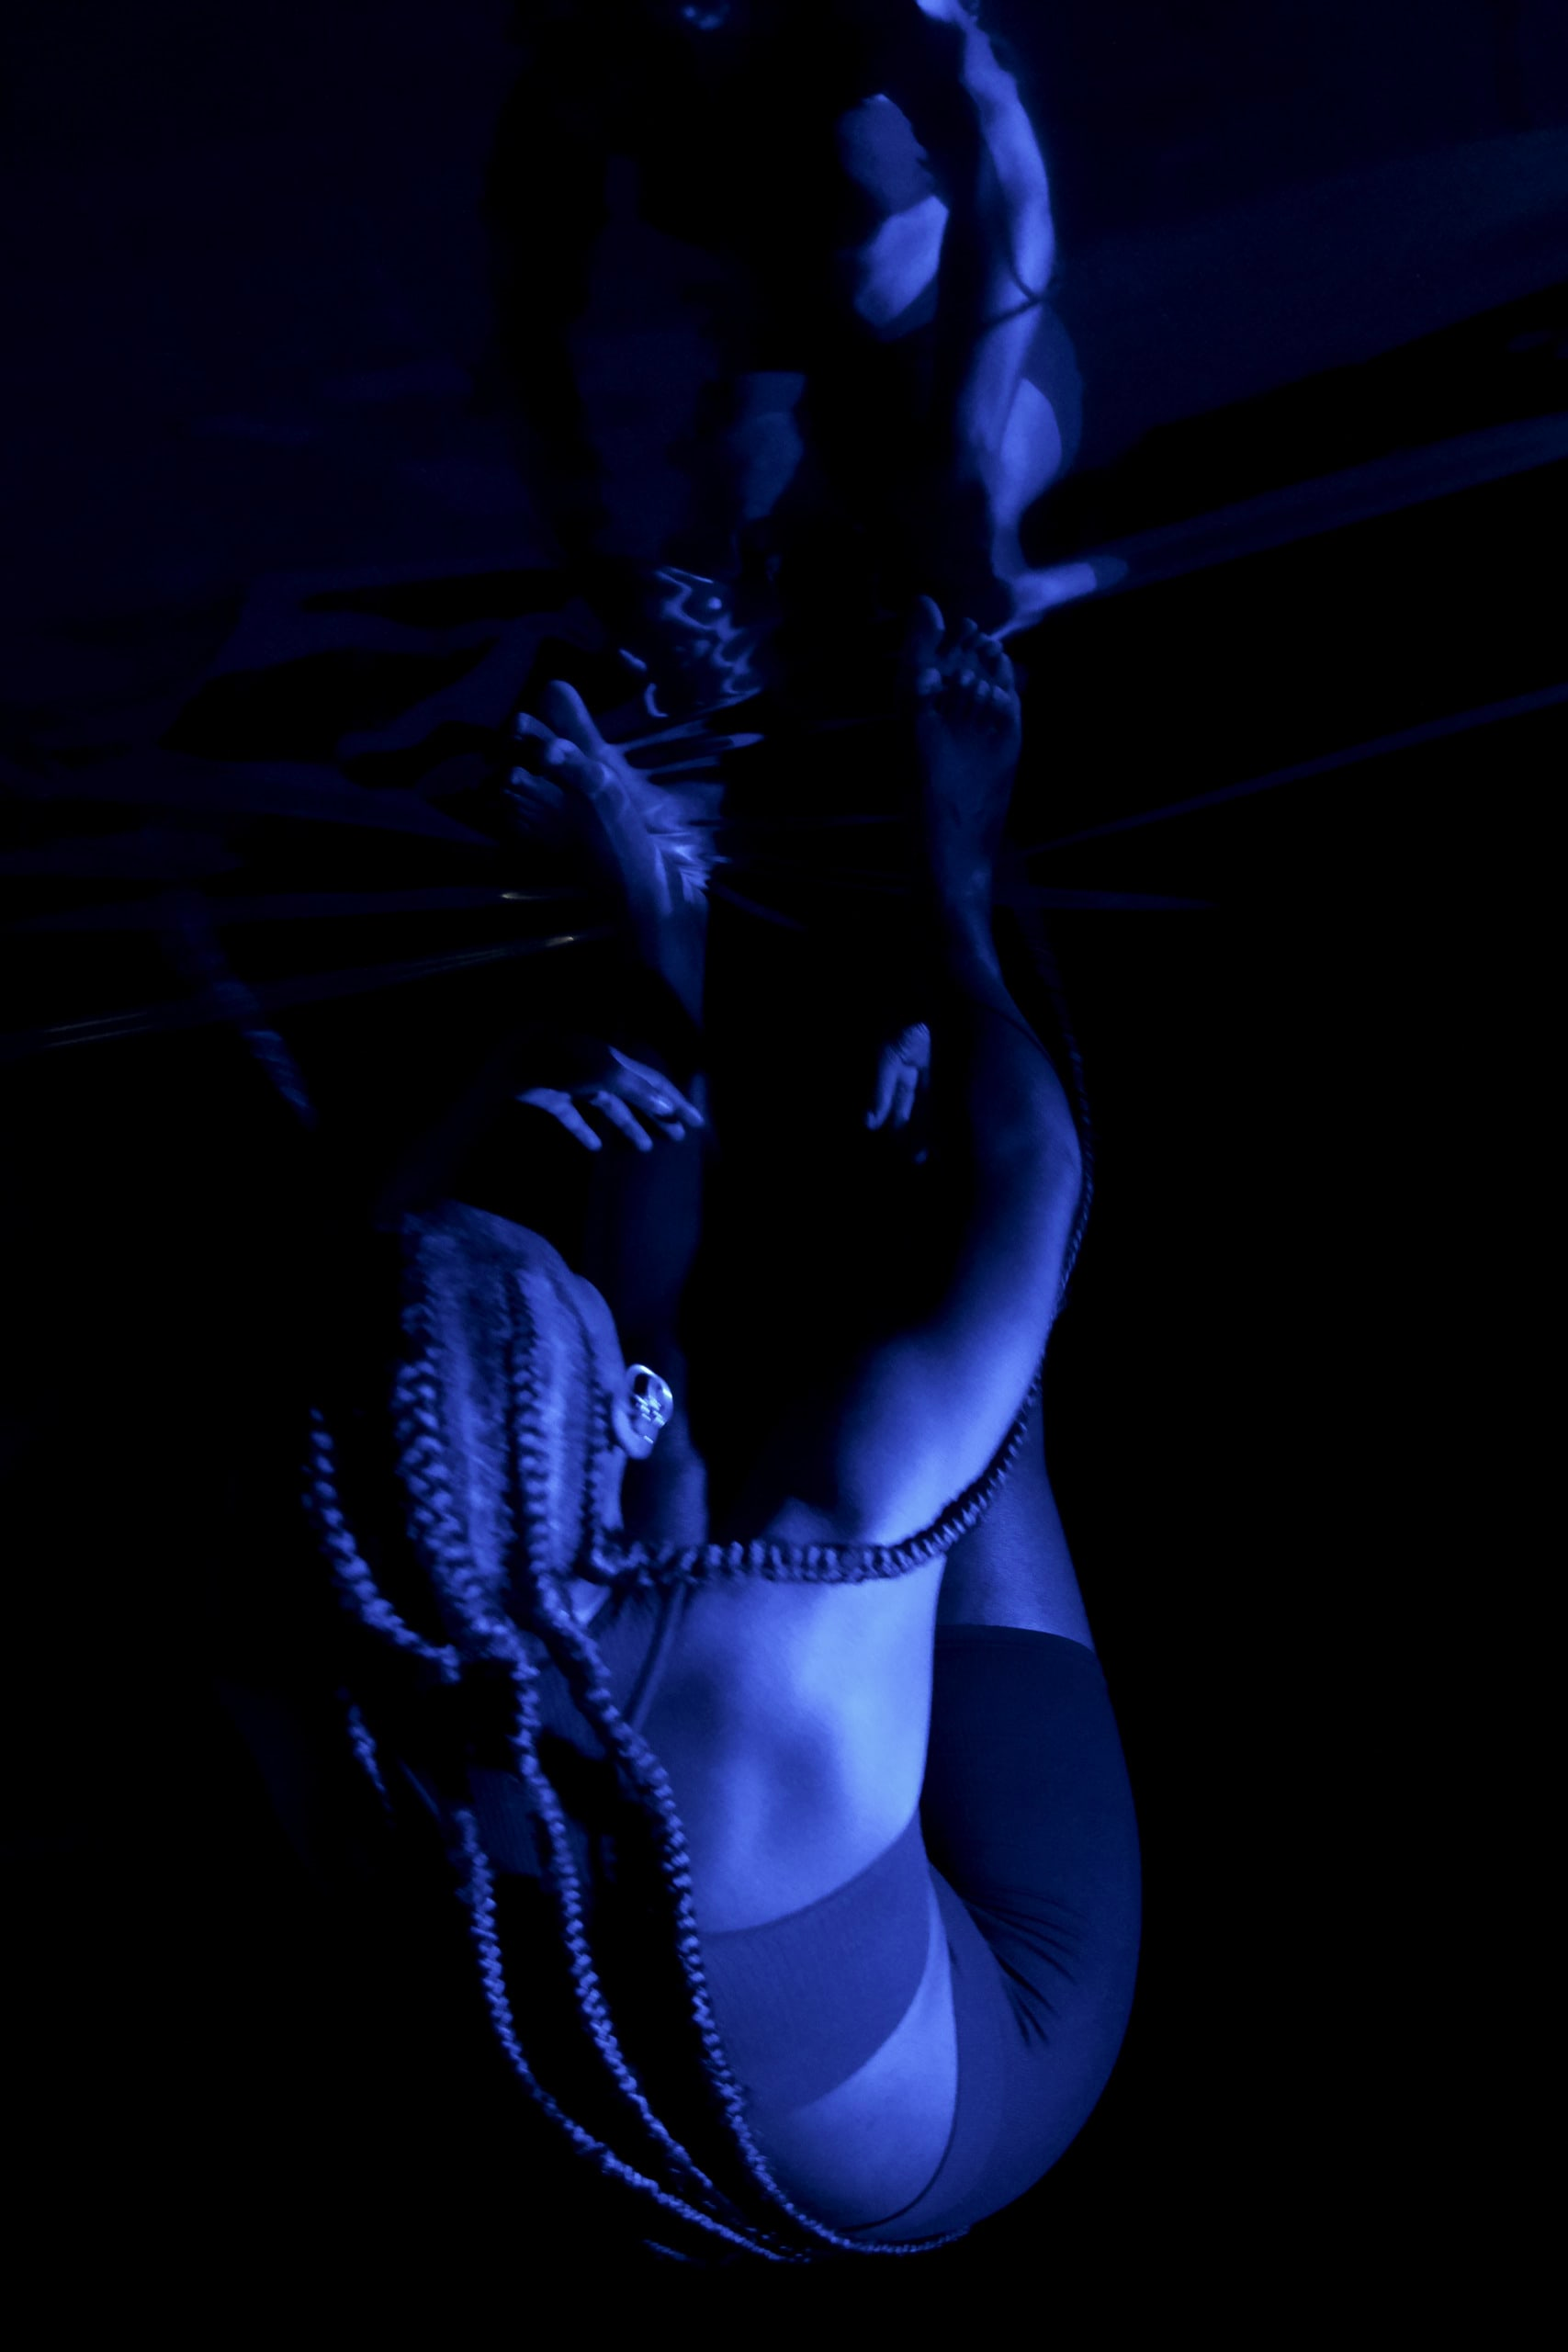 An blue tinted aerial image of woman bent over, reaching up to her legs, which are at the top of the image, on a black background.